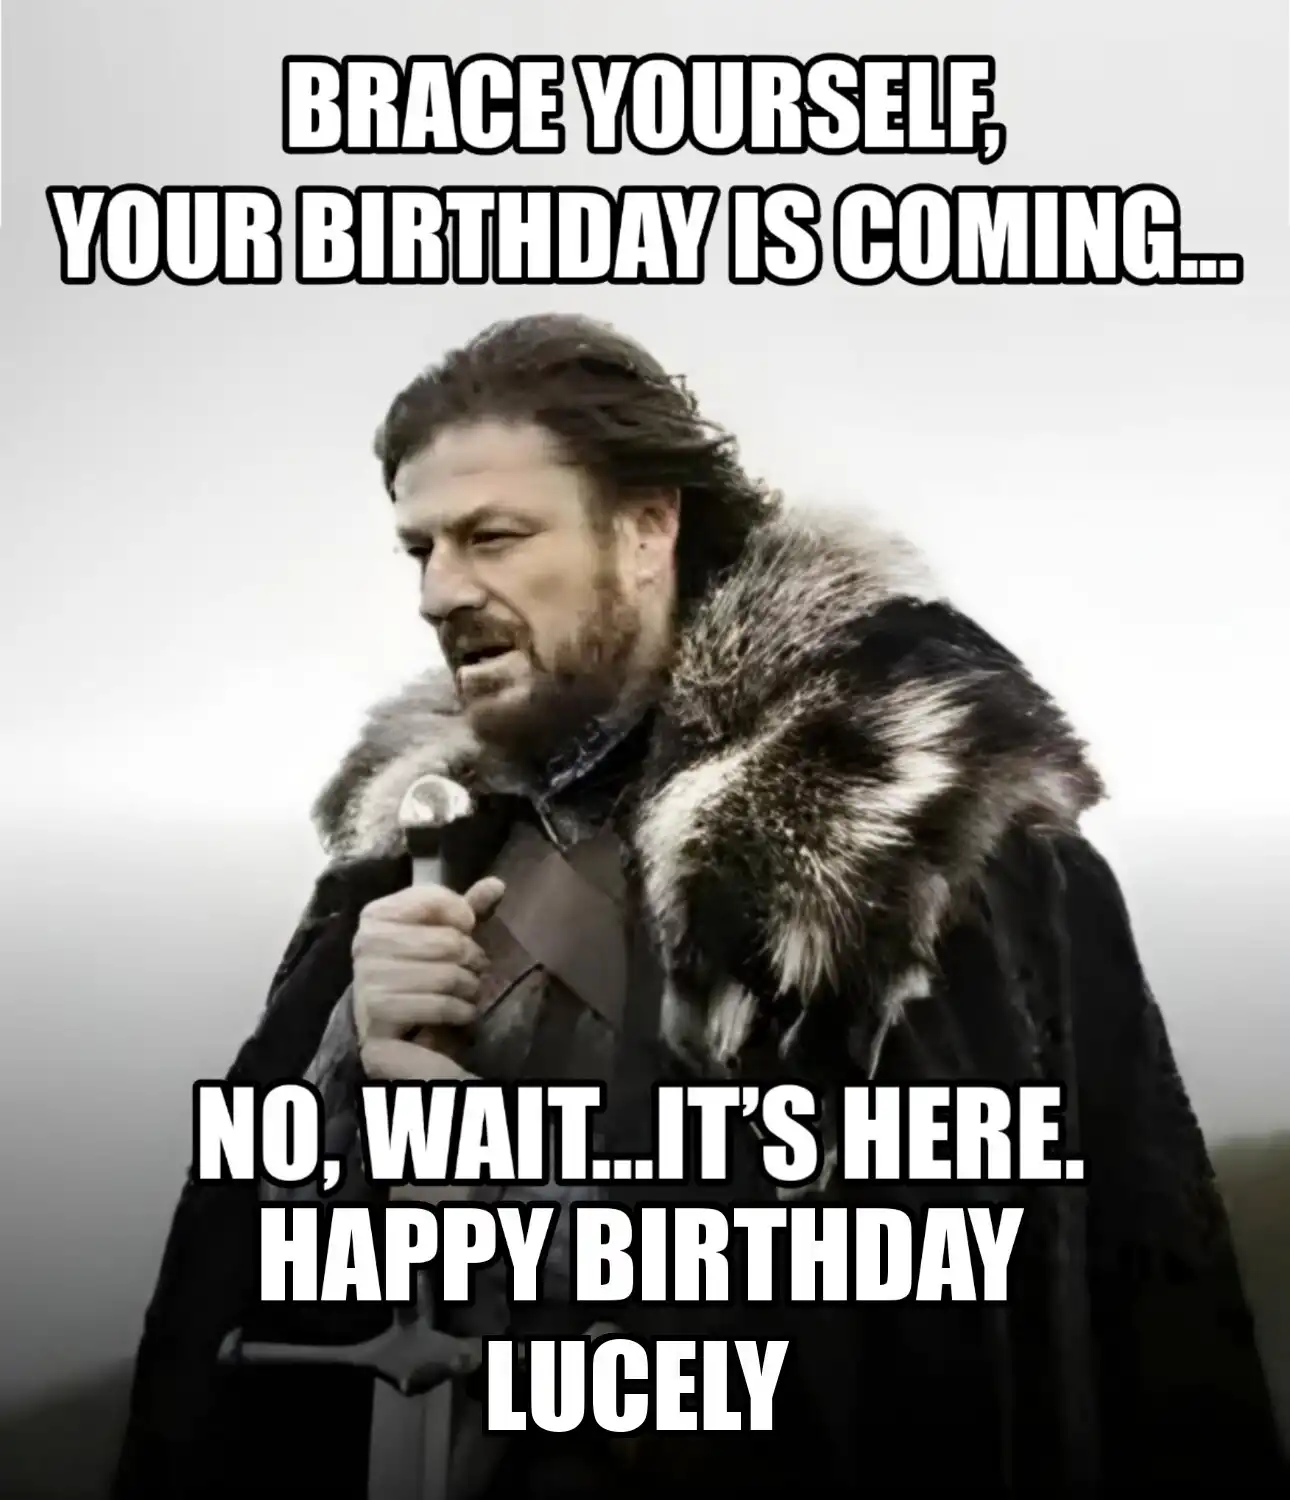 Happy Birthday Lucely Brace Yourself Your Birthday Is Coming Meme